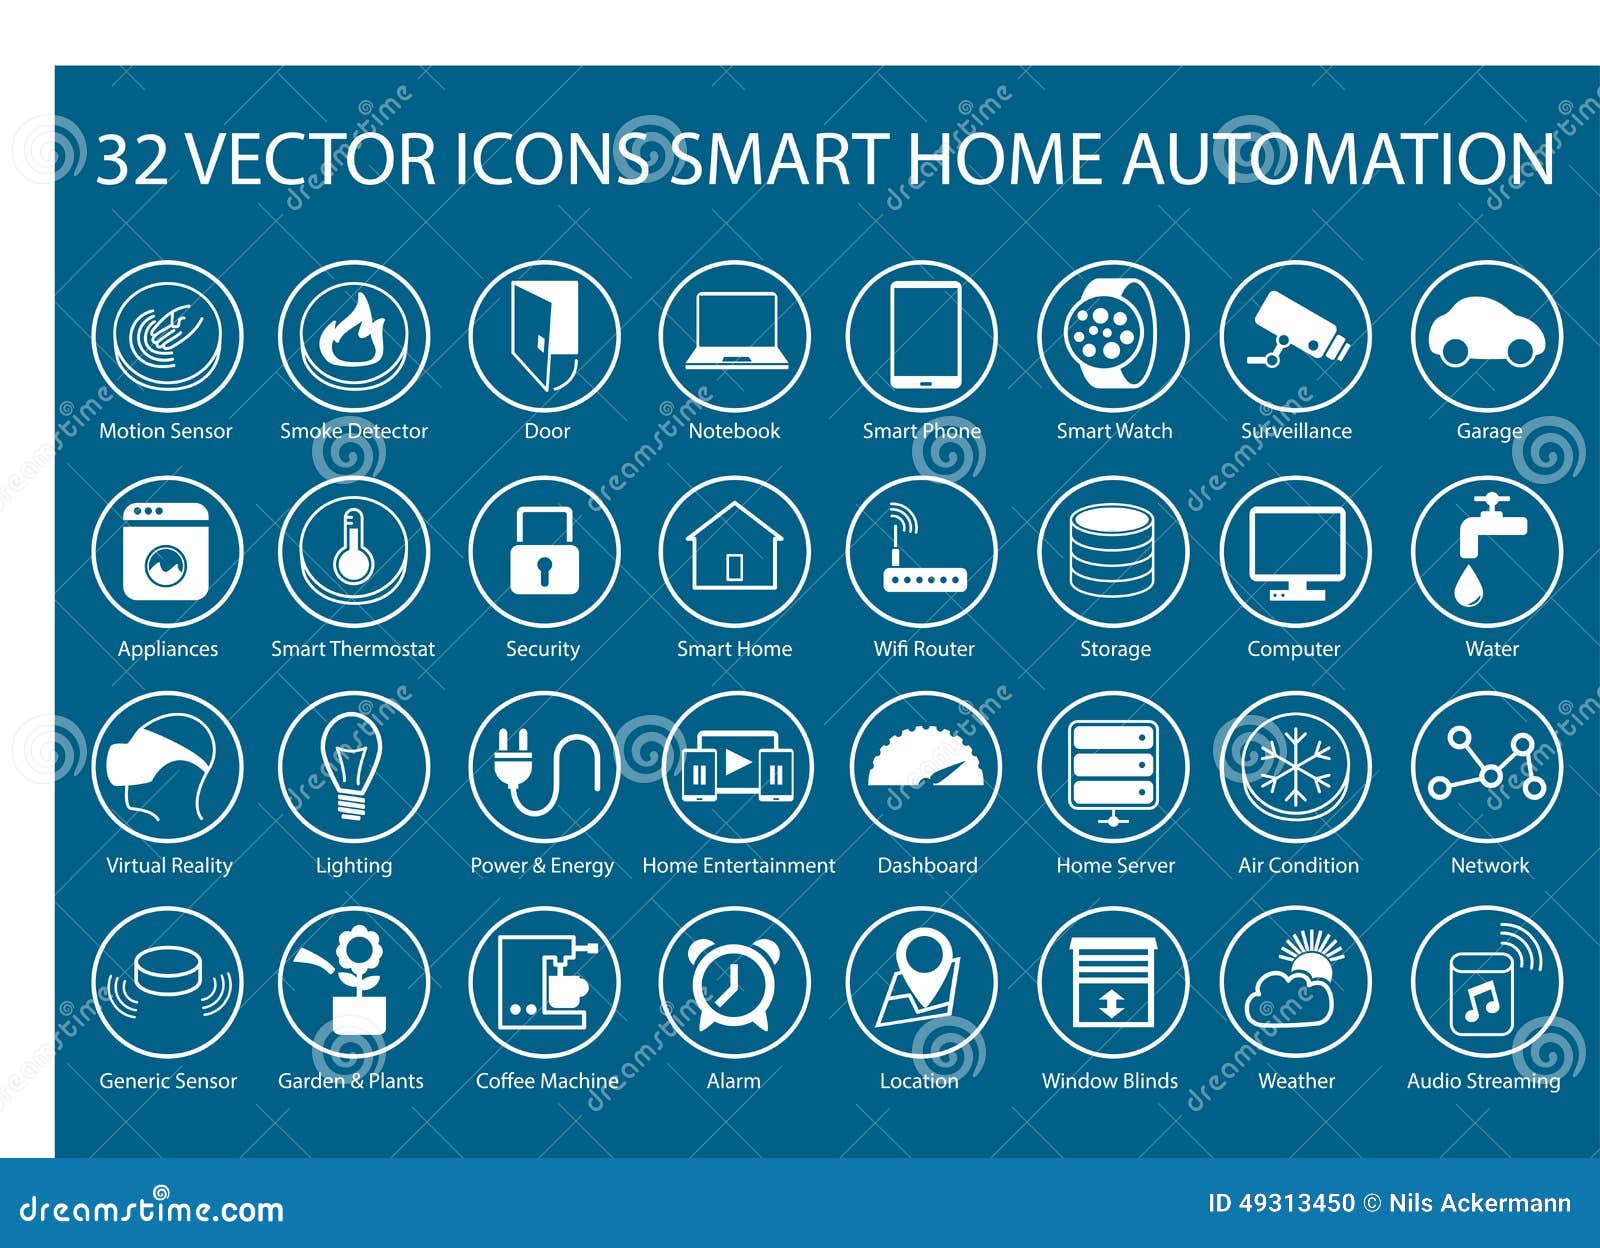 customizable icons for infographics regarding smart home automation